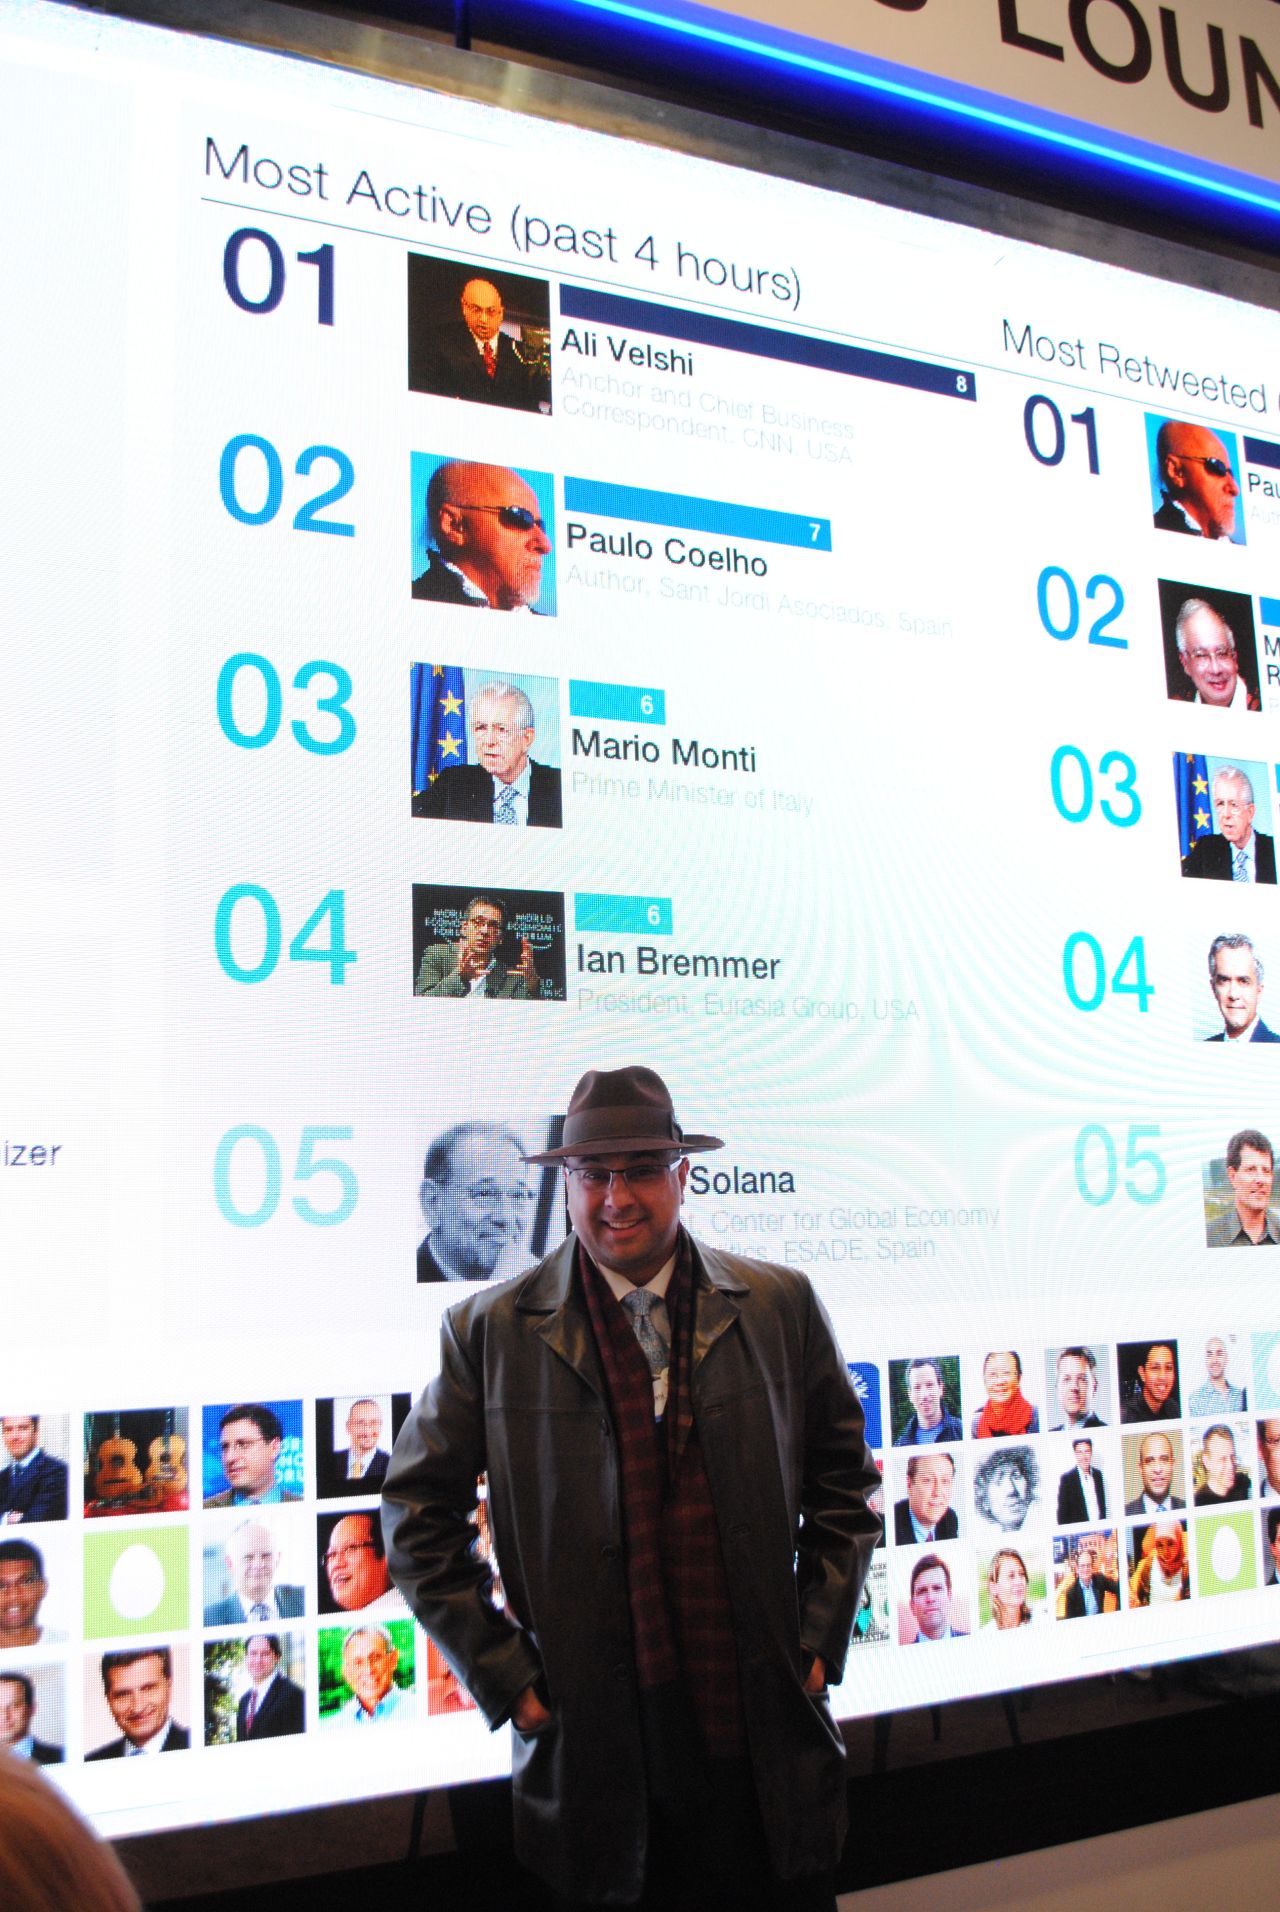 CNN's Ali Velshi poses in front of the WEF Twitter board.